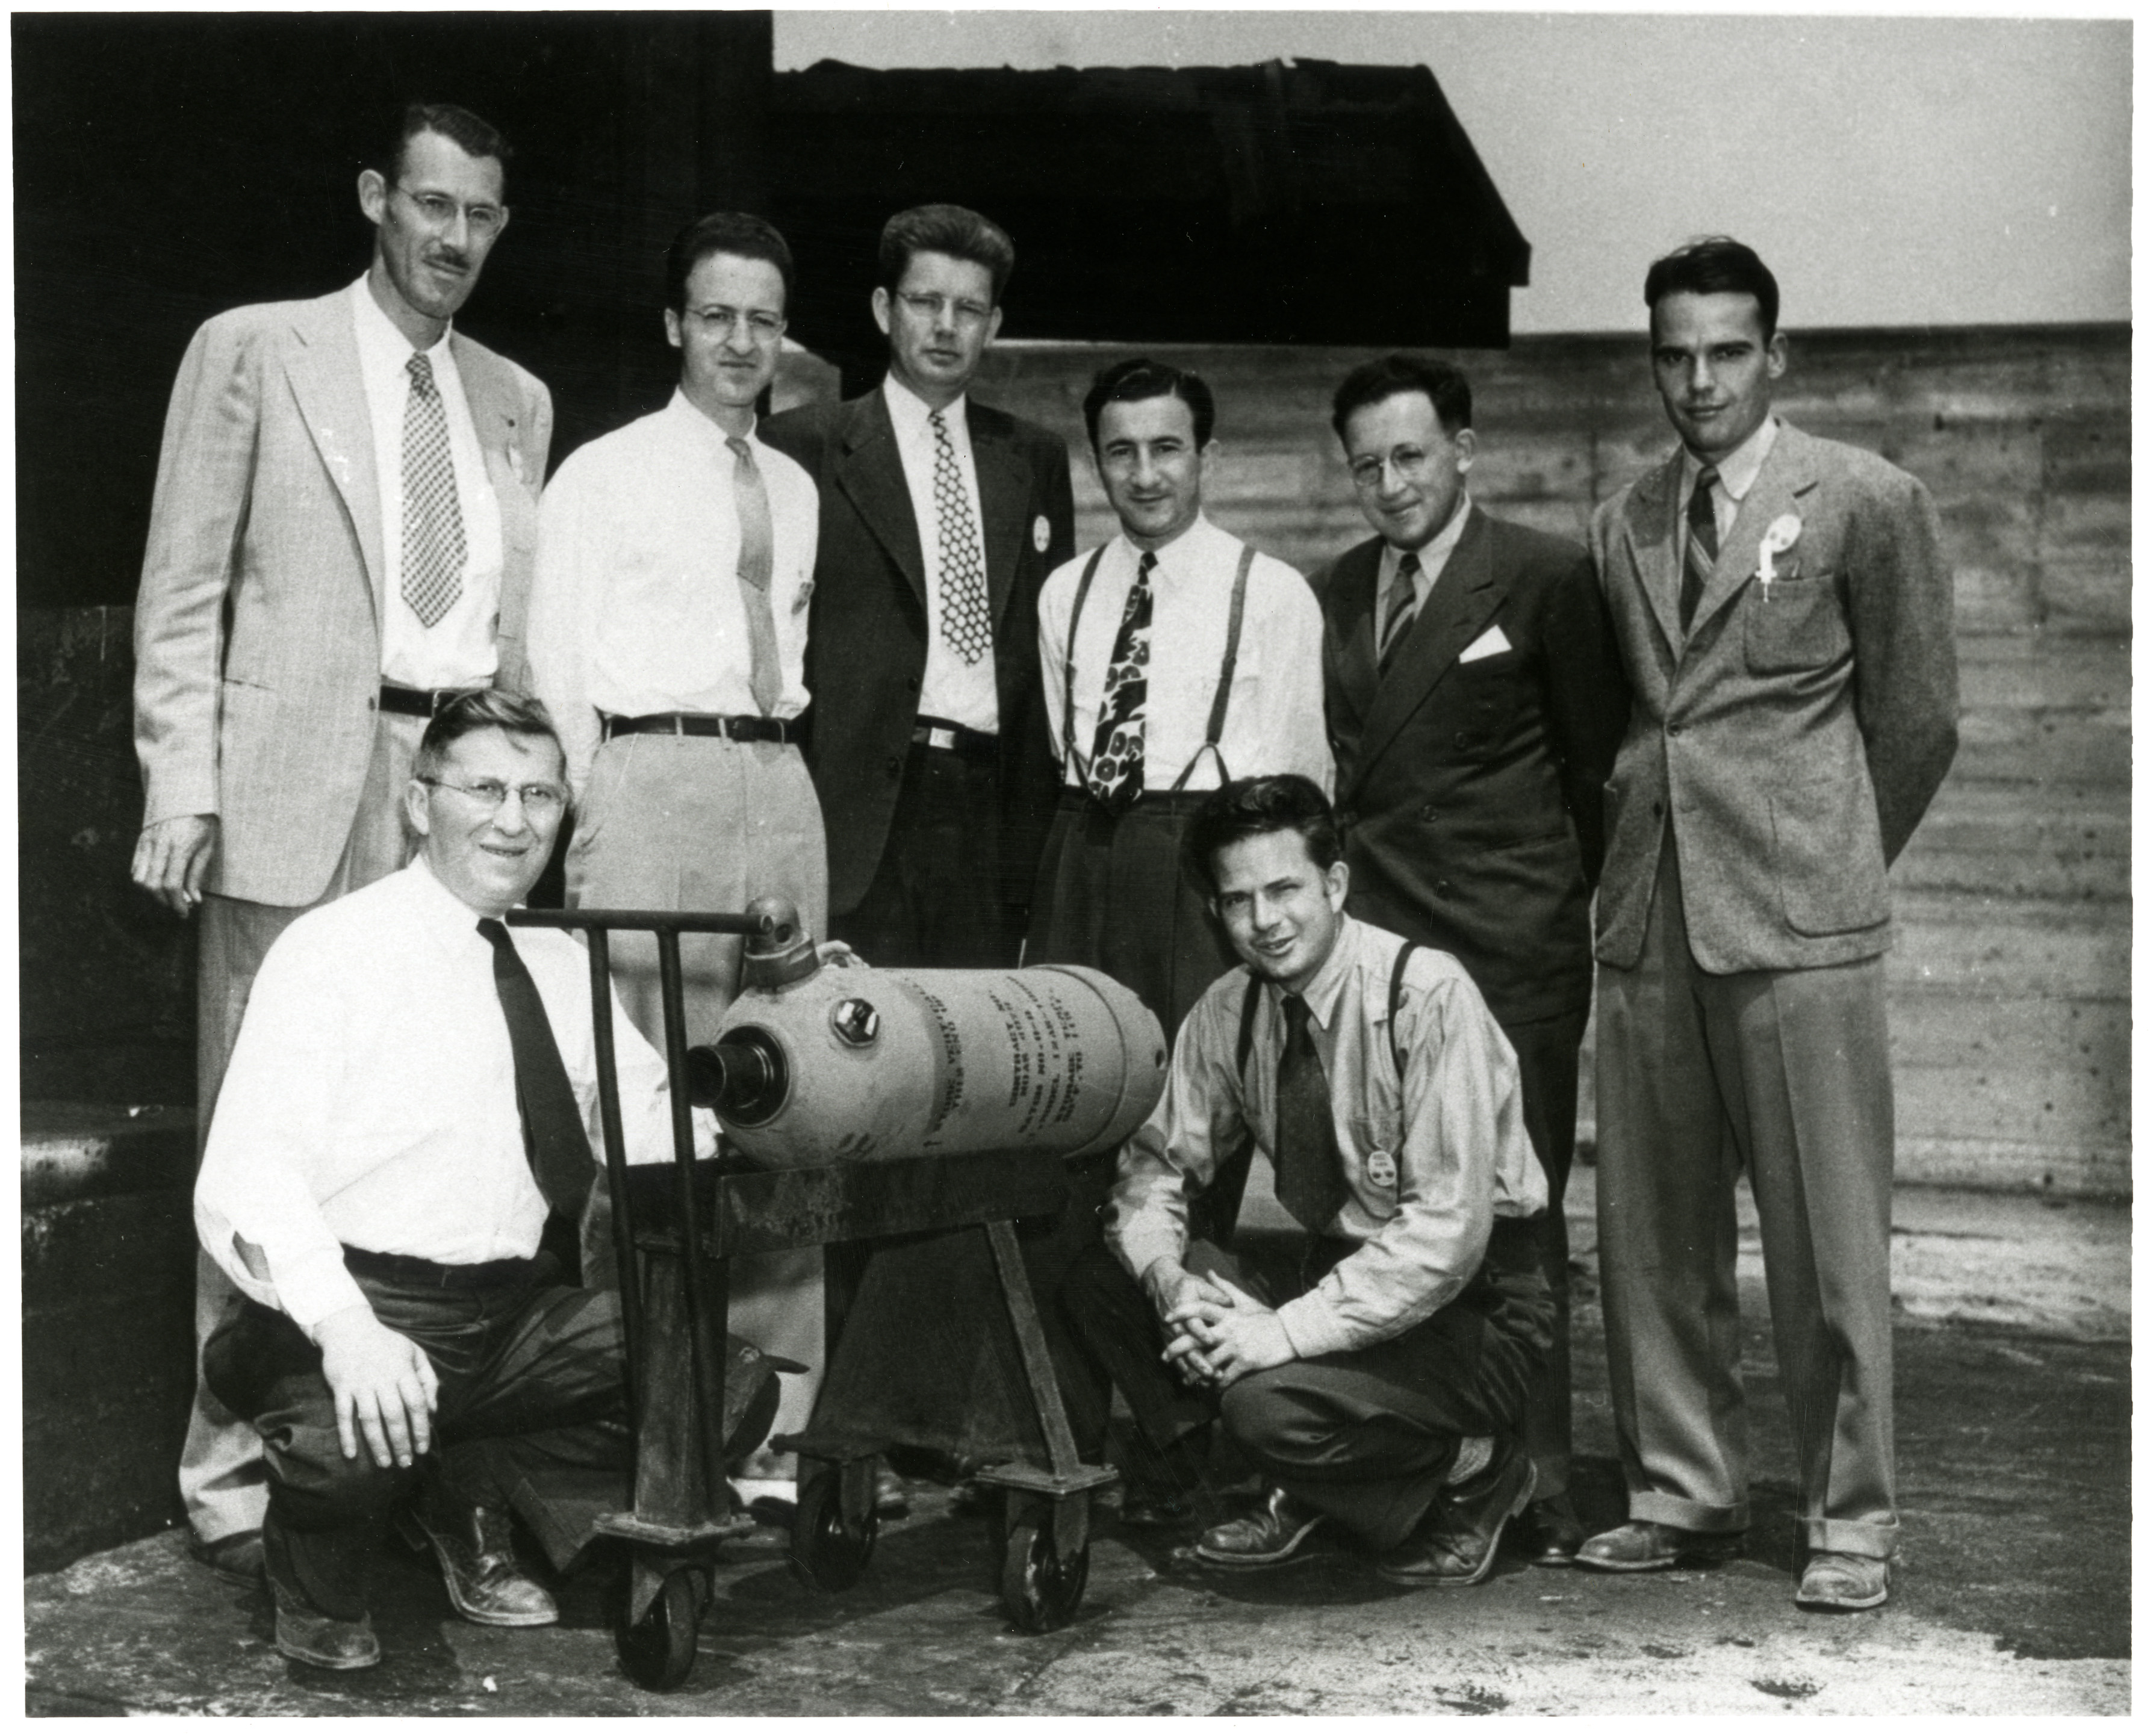 Aerojet Team for the Solid-Propellant JATO.  Left to right: front row, M.J. Zucrow, the 12 AS-1000 JATO unit, and Glenn Miller; back row, Norton Moore, A.I. Antonio, Brooks Morris, Bernie Dorman, Martin Summerfield, and Robert D. Young.